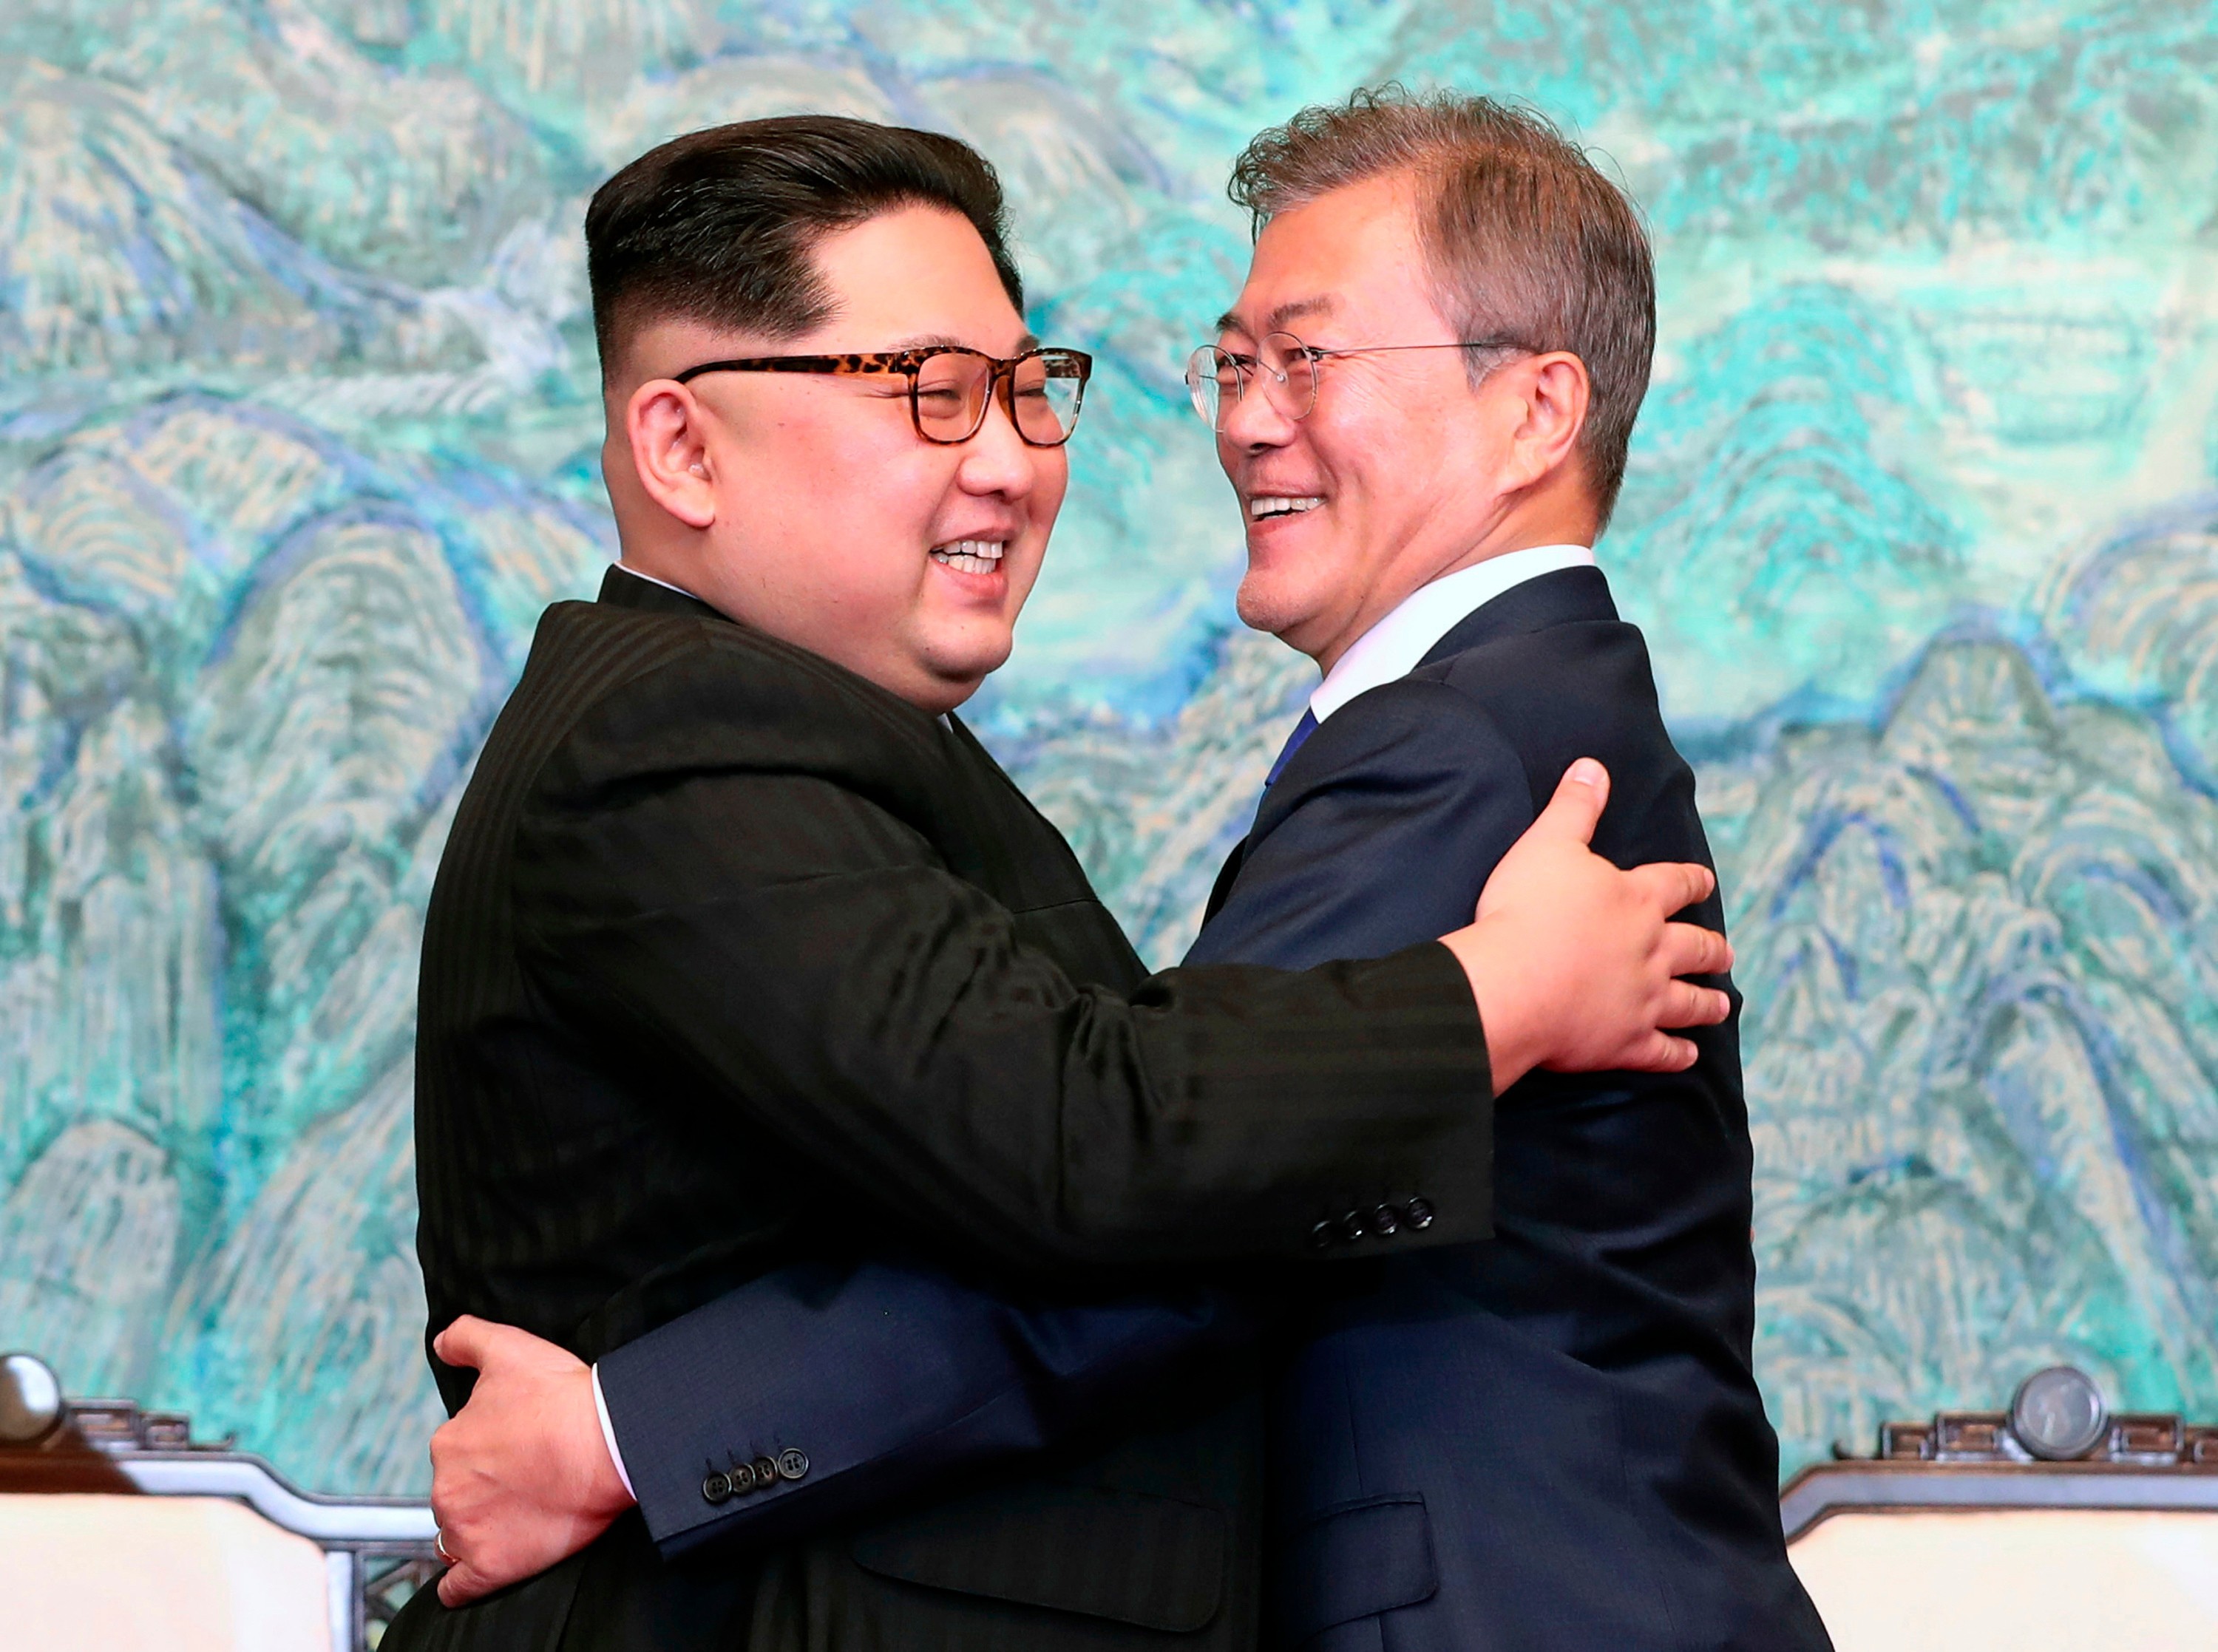 North Korean leader Kim Jong-un’s meeting with South Korean President Moon Jae-in in April established diplomacy as the working method for engaging with North Korea, Edward Howell writes. Photo: AP